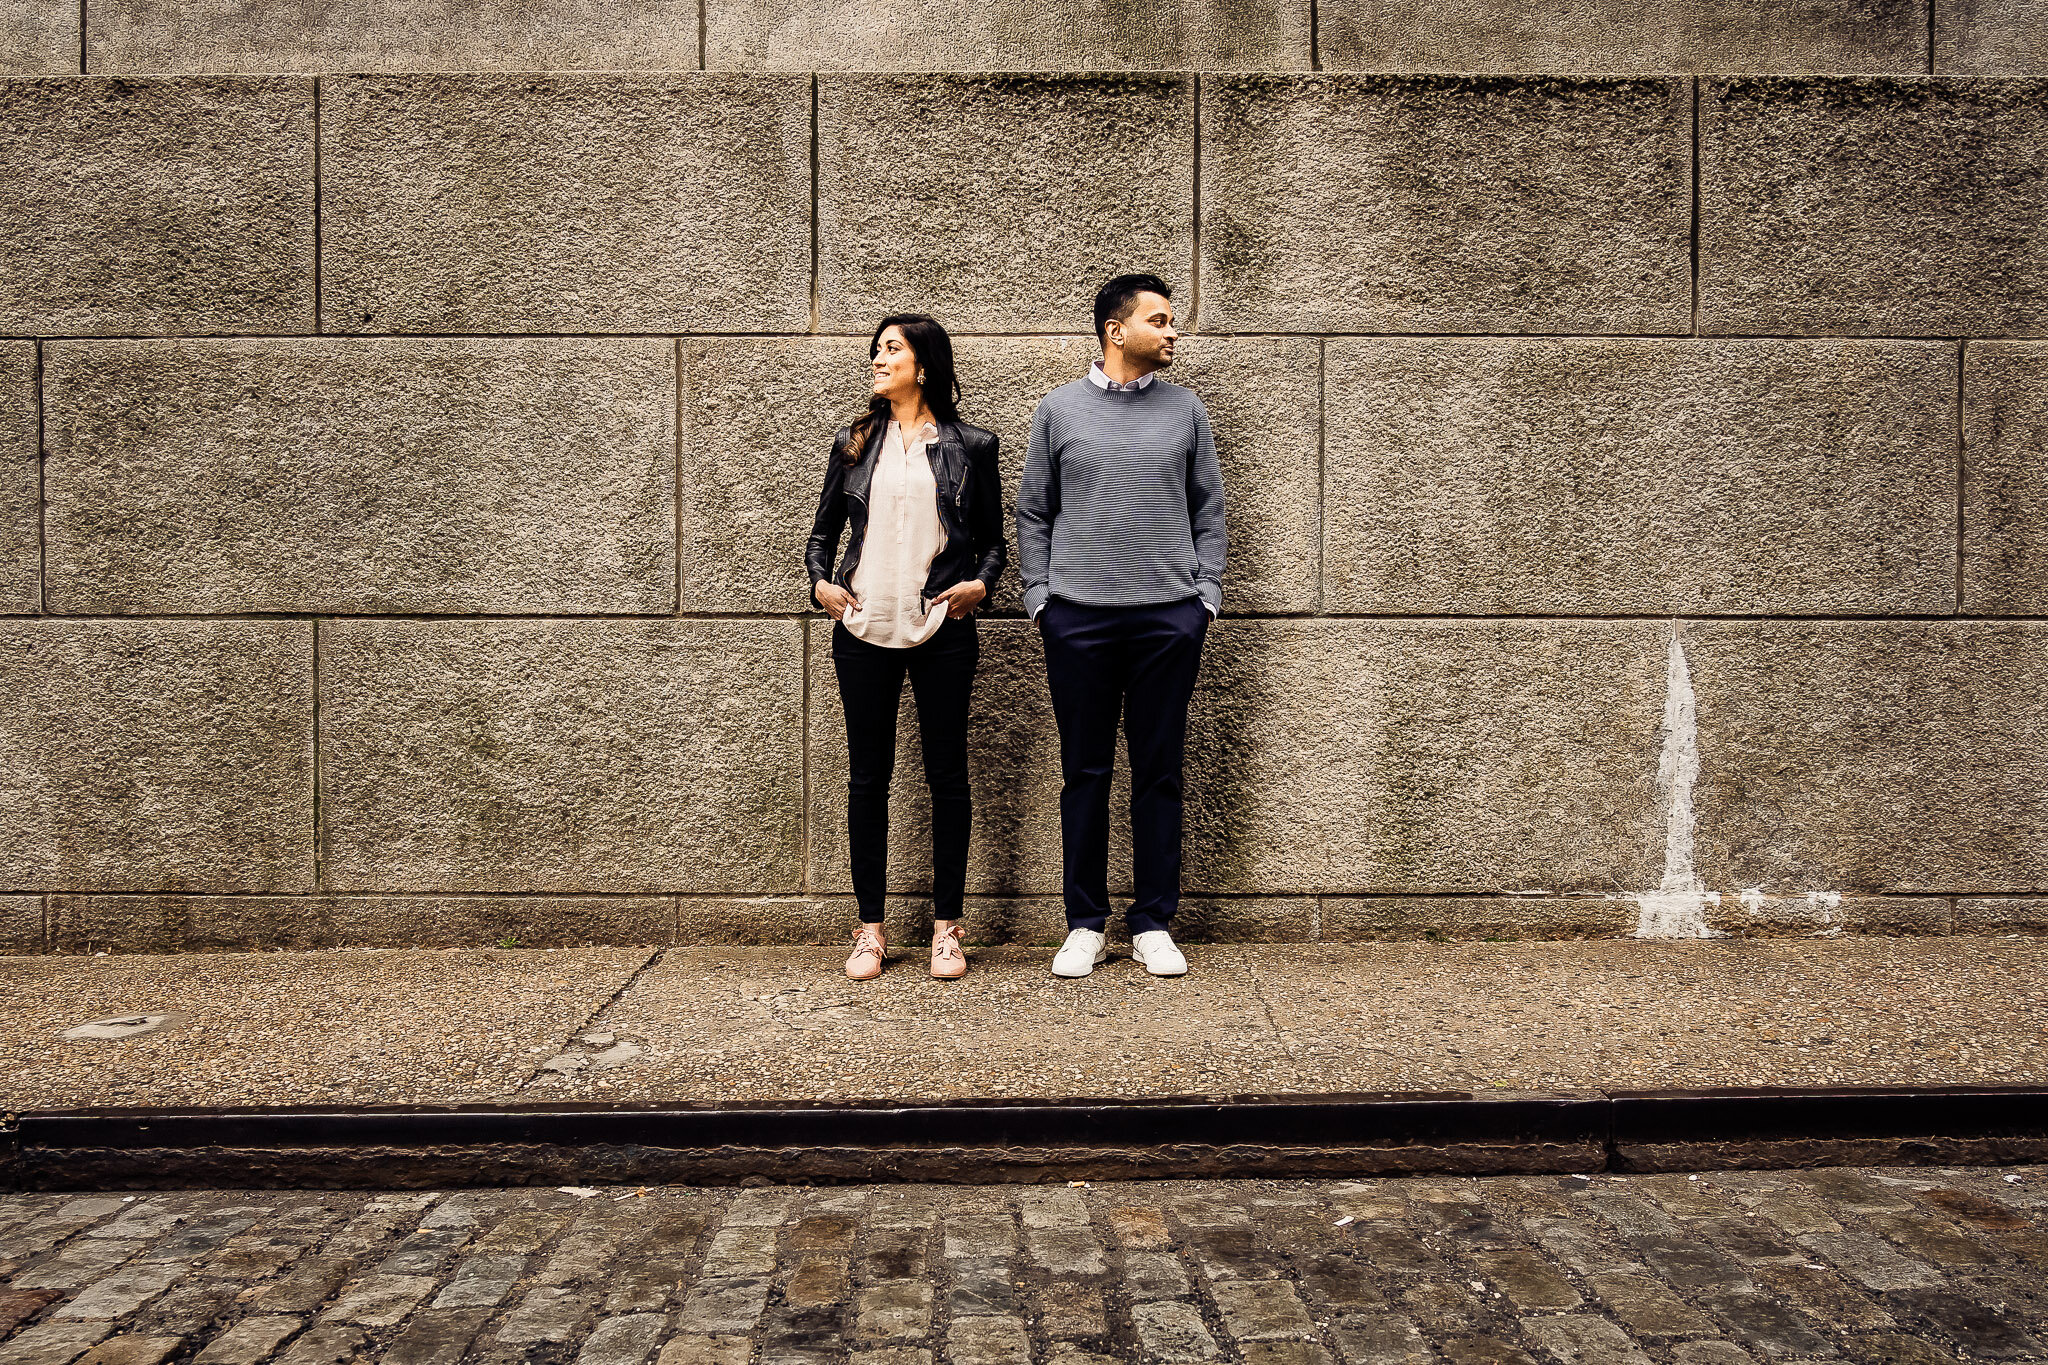 NYC Engagement Session in DUMBO and RED HOOK Brooklyn 